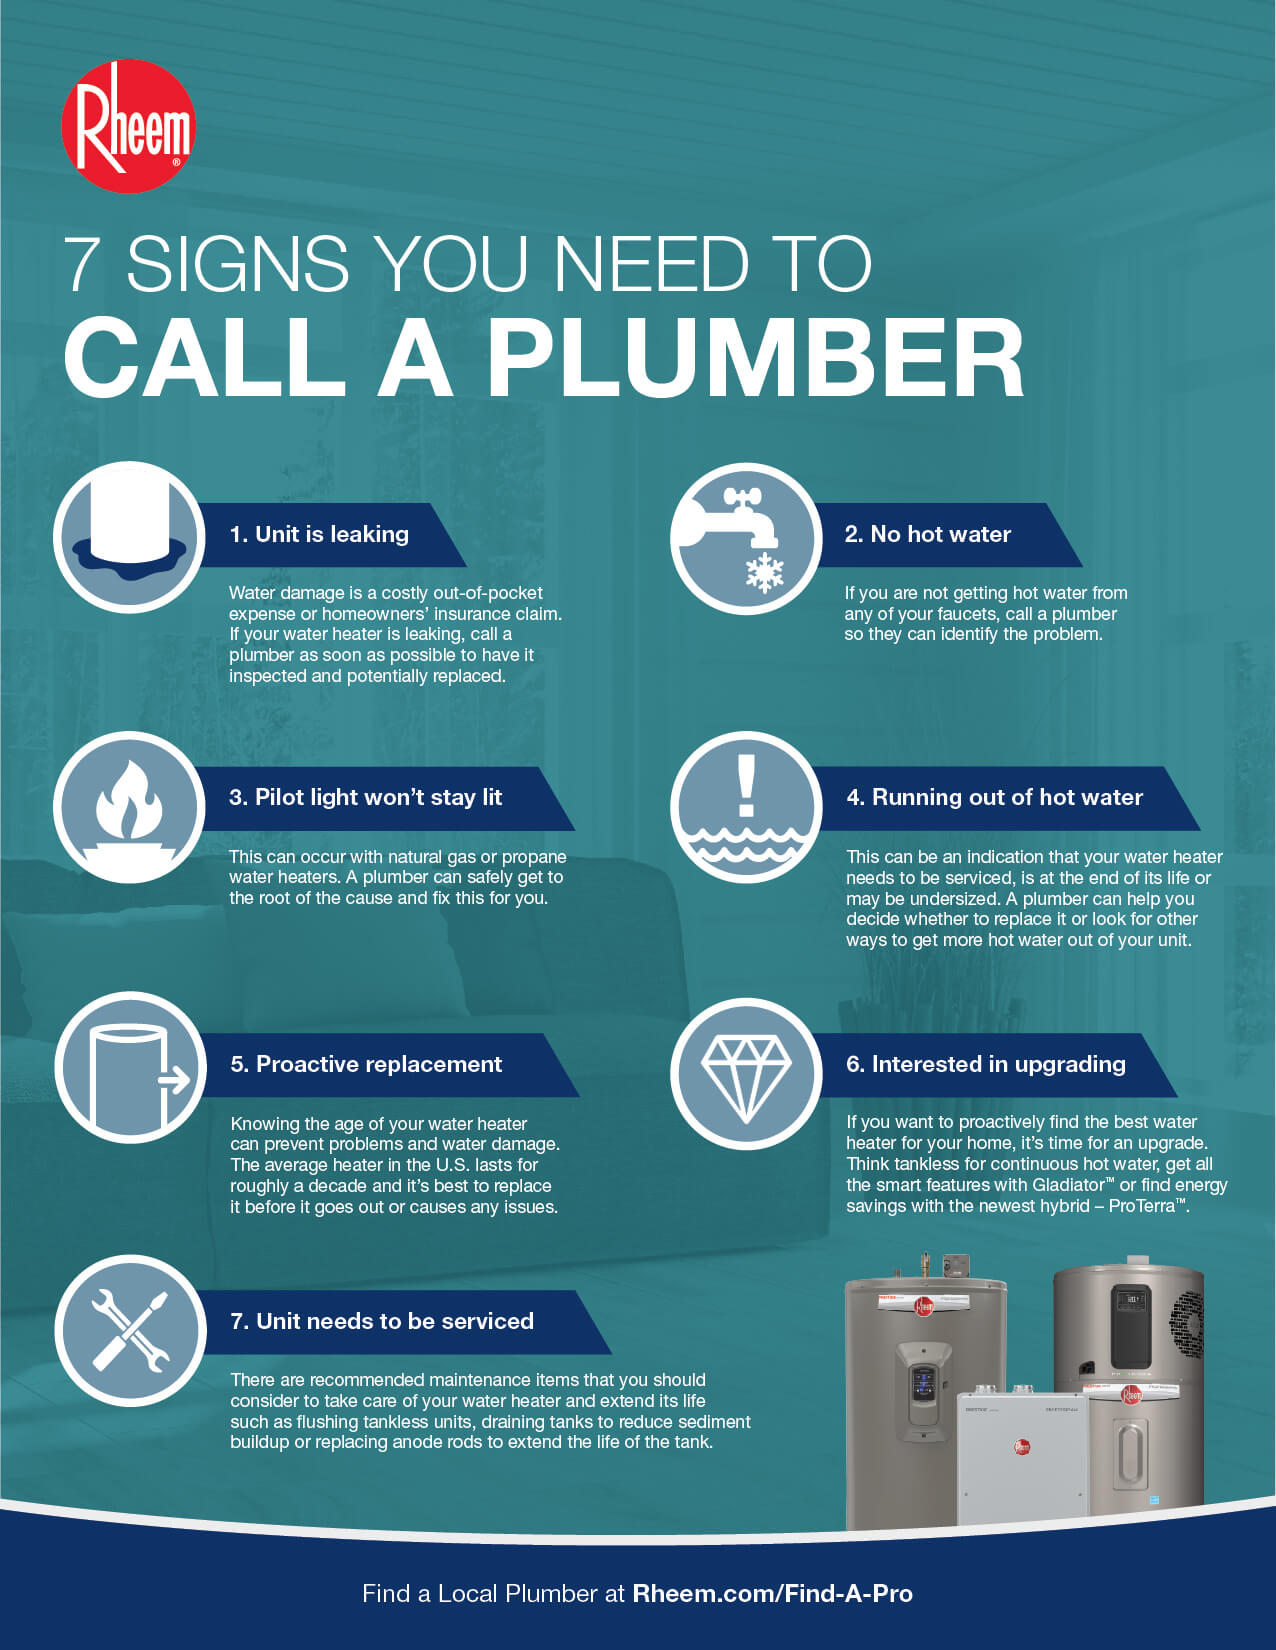 image of the printout with 7 signs you need to call a plumber